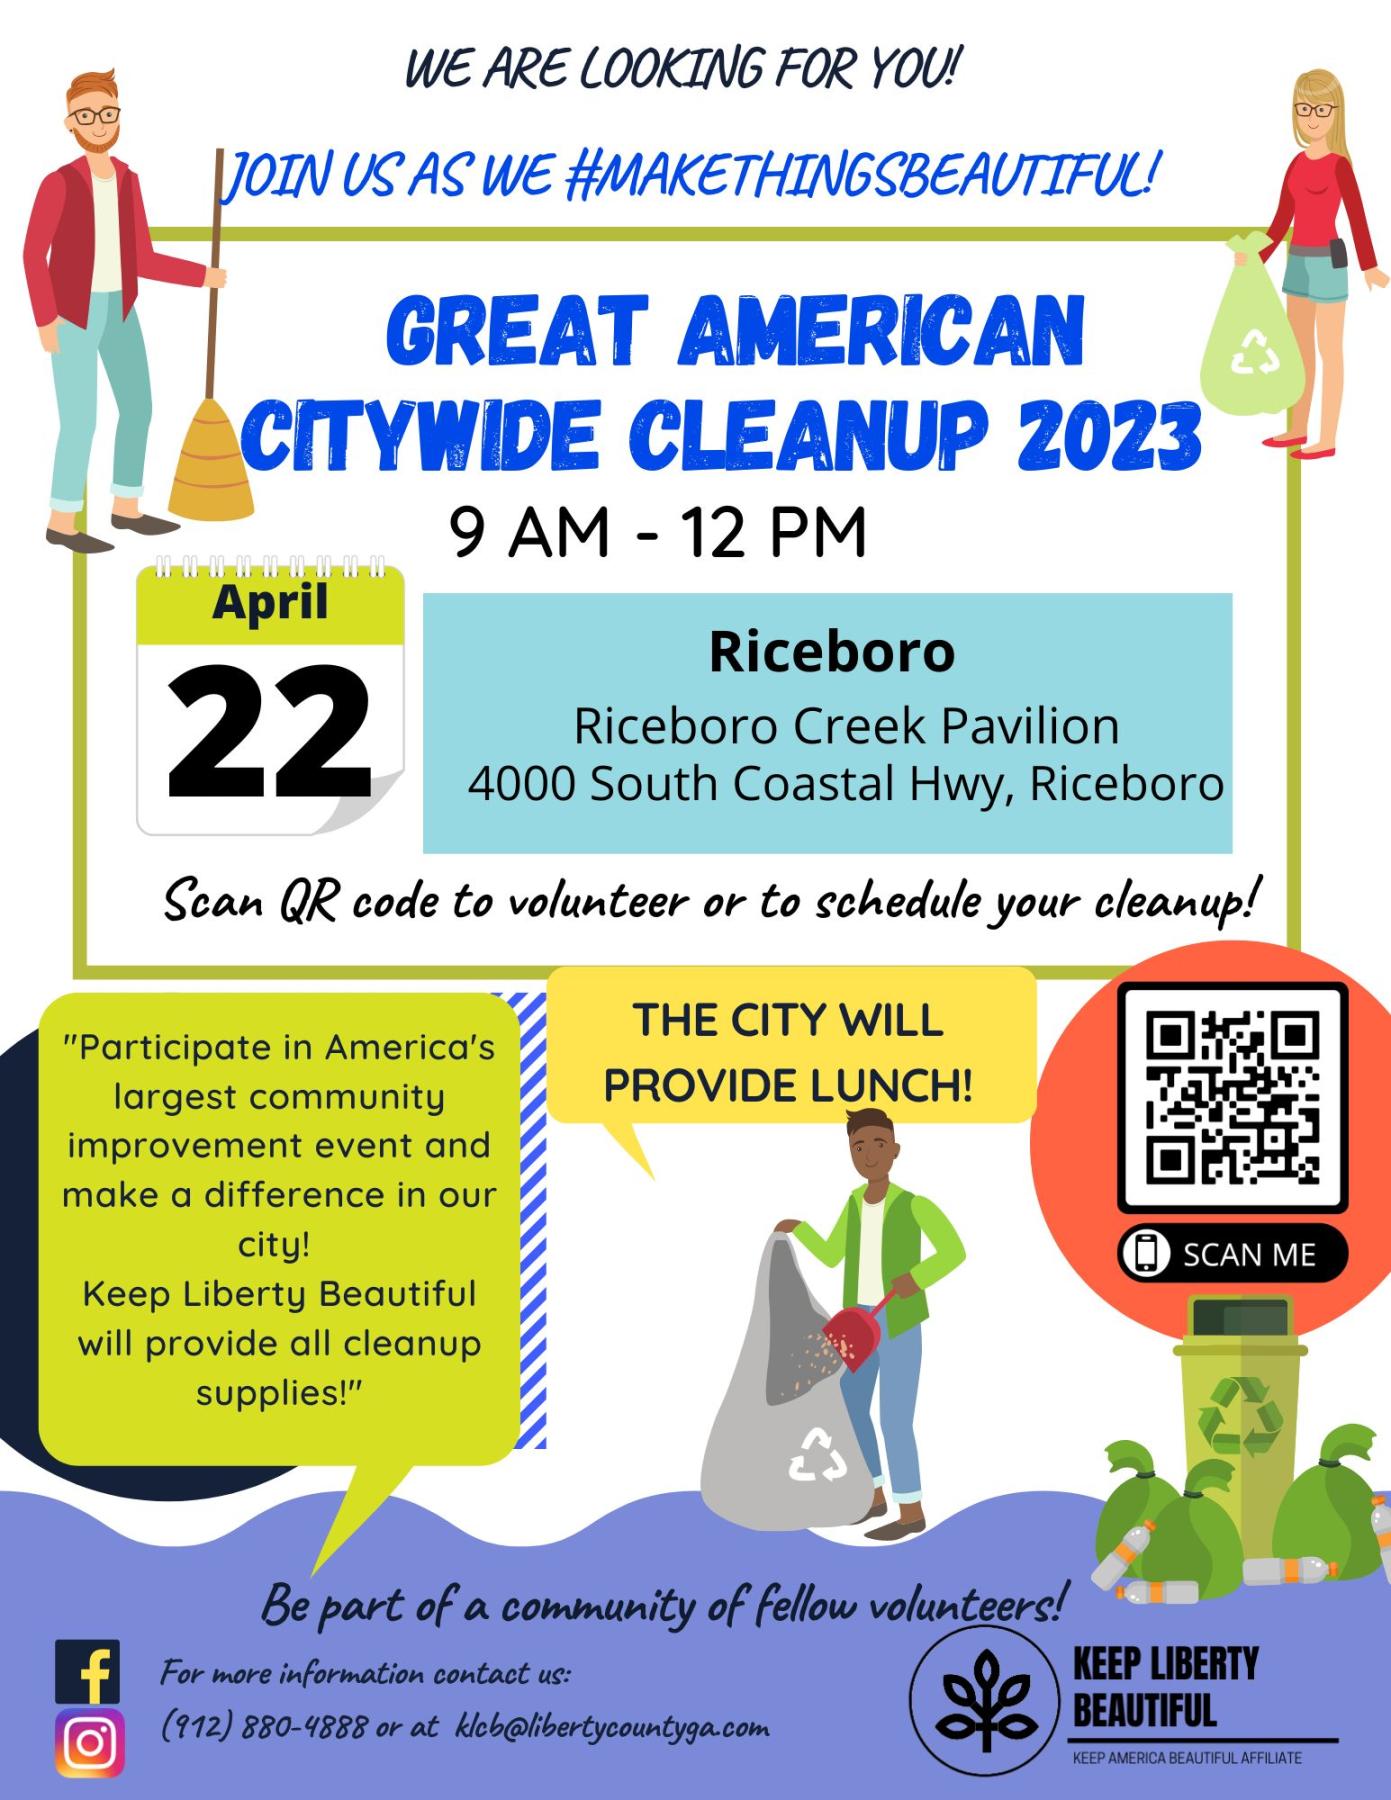 Great American City Wide Cleanup 2023